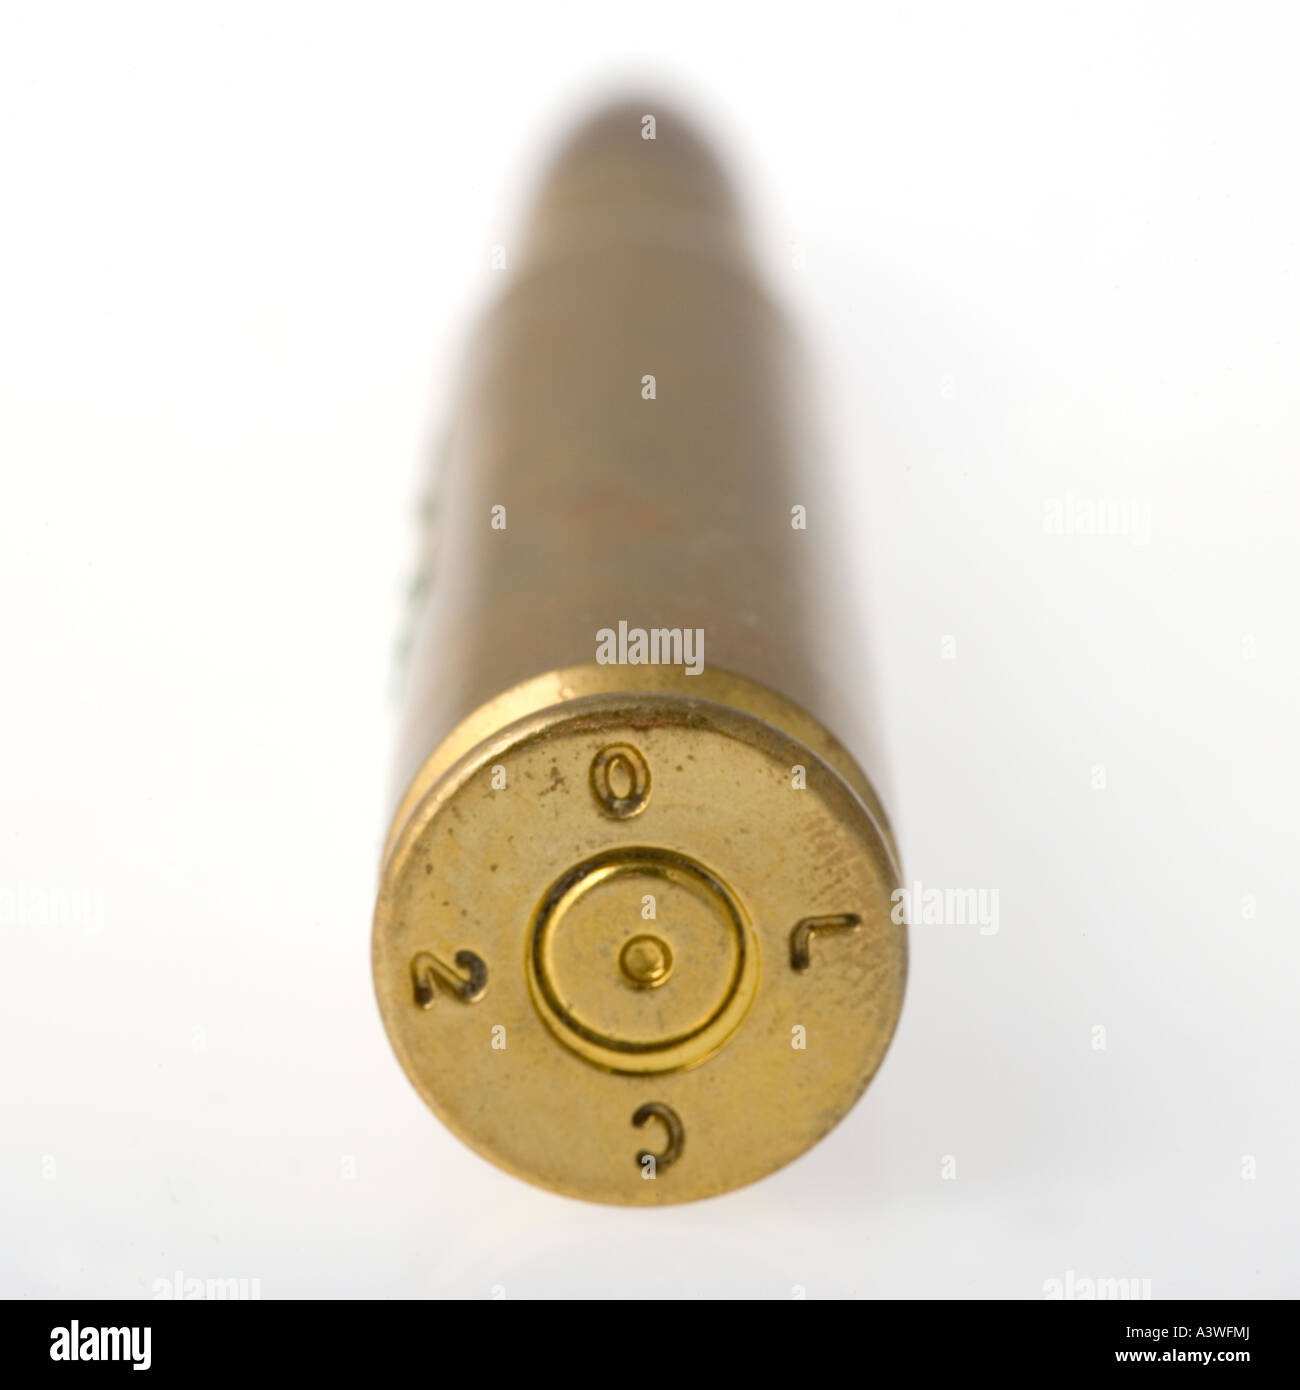 A massive 50 Caliber bullet on a white background. War and Armed Conflict concepts. Stock Photo